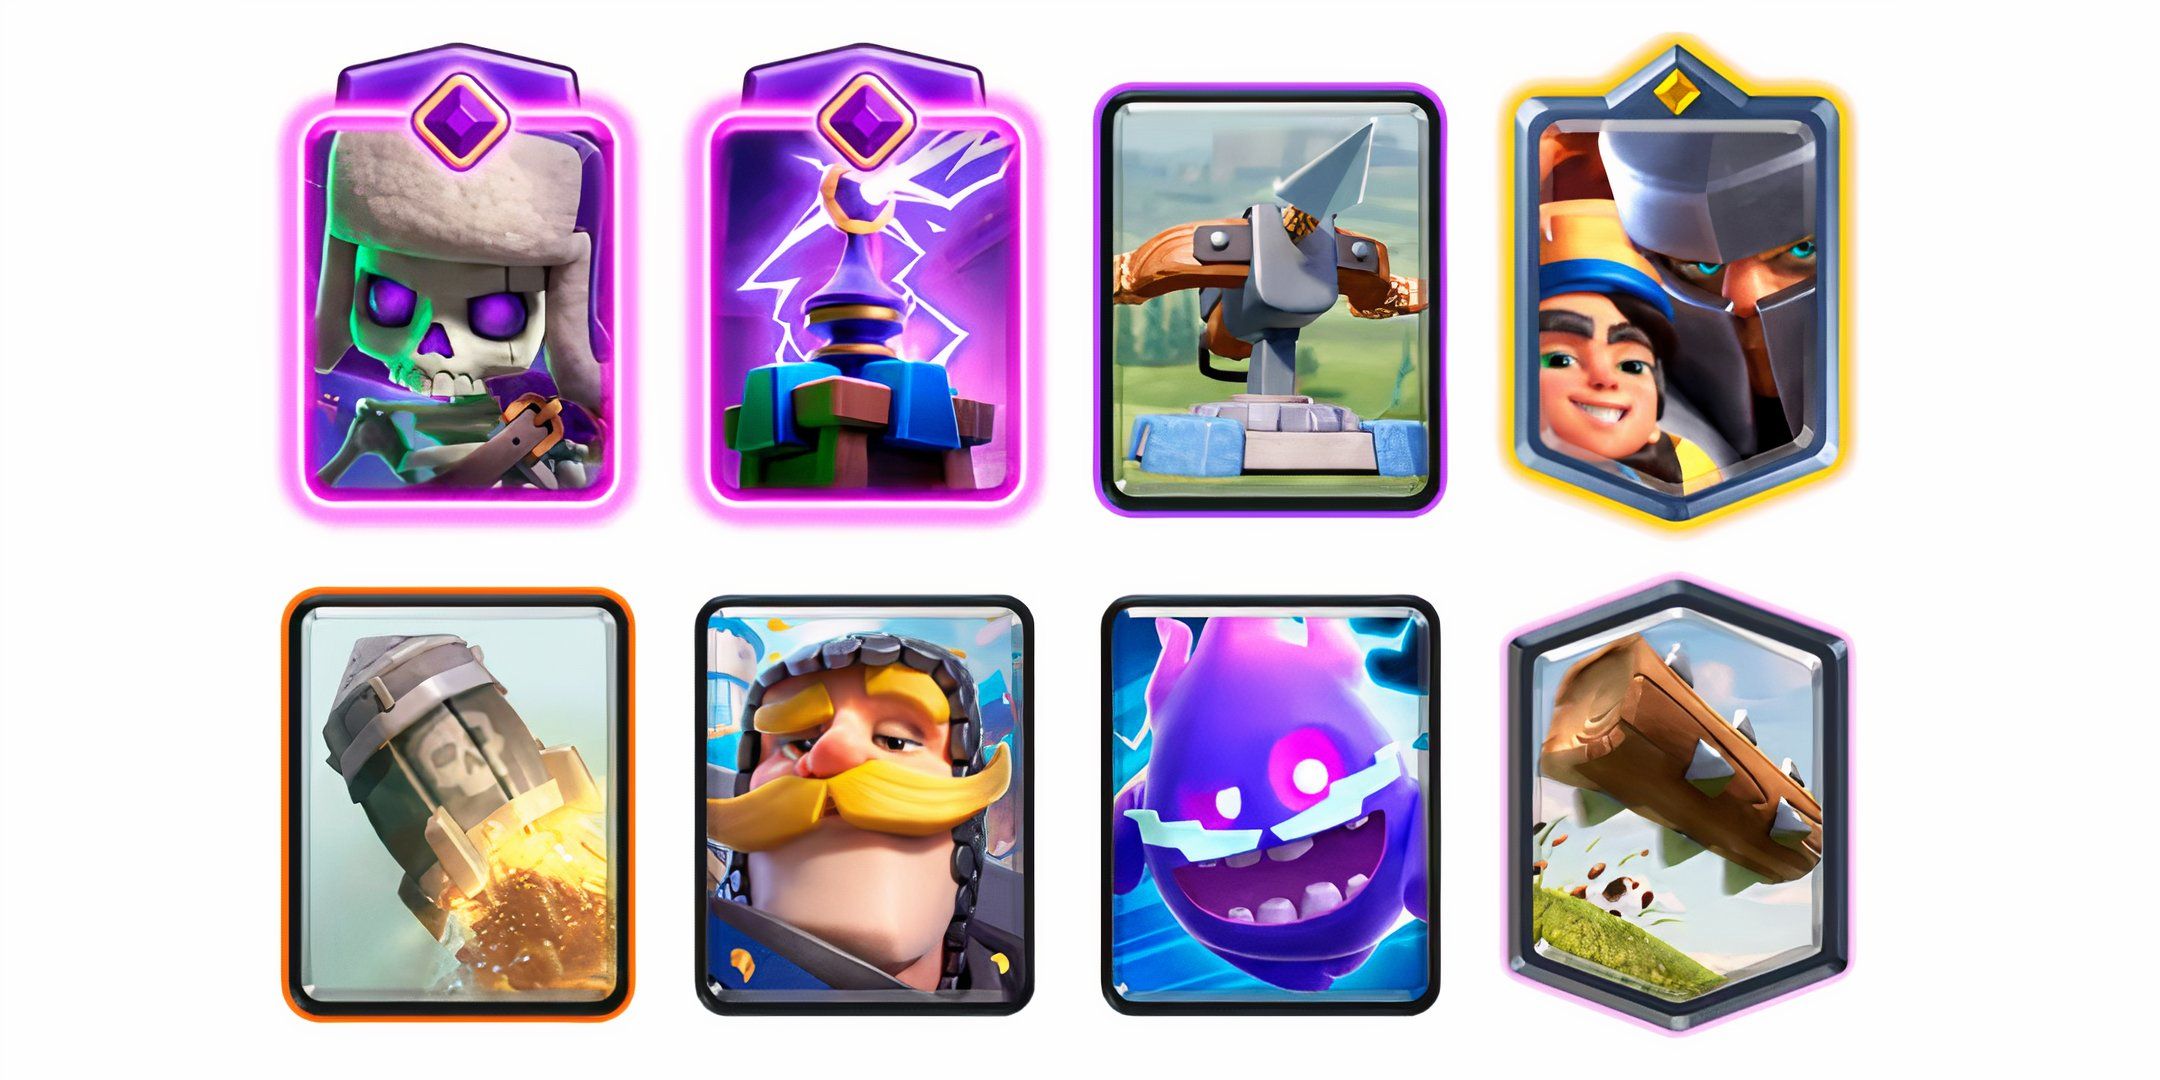 The X-Bow cycle deck in Clash Royale Grand Challenge